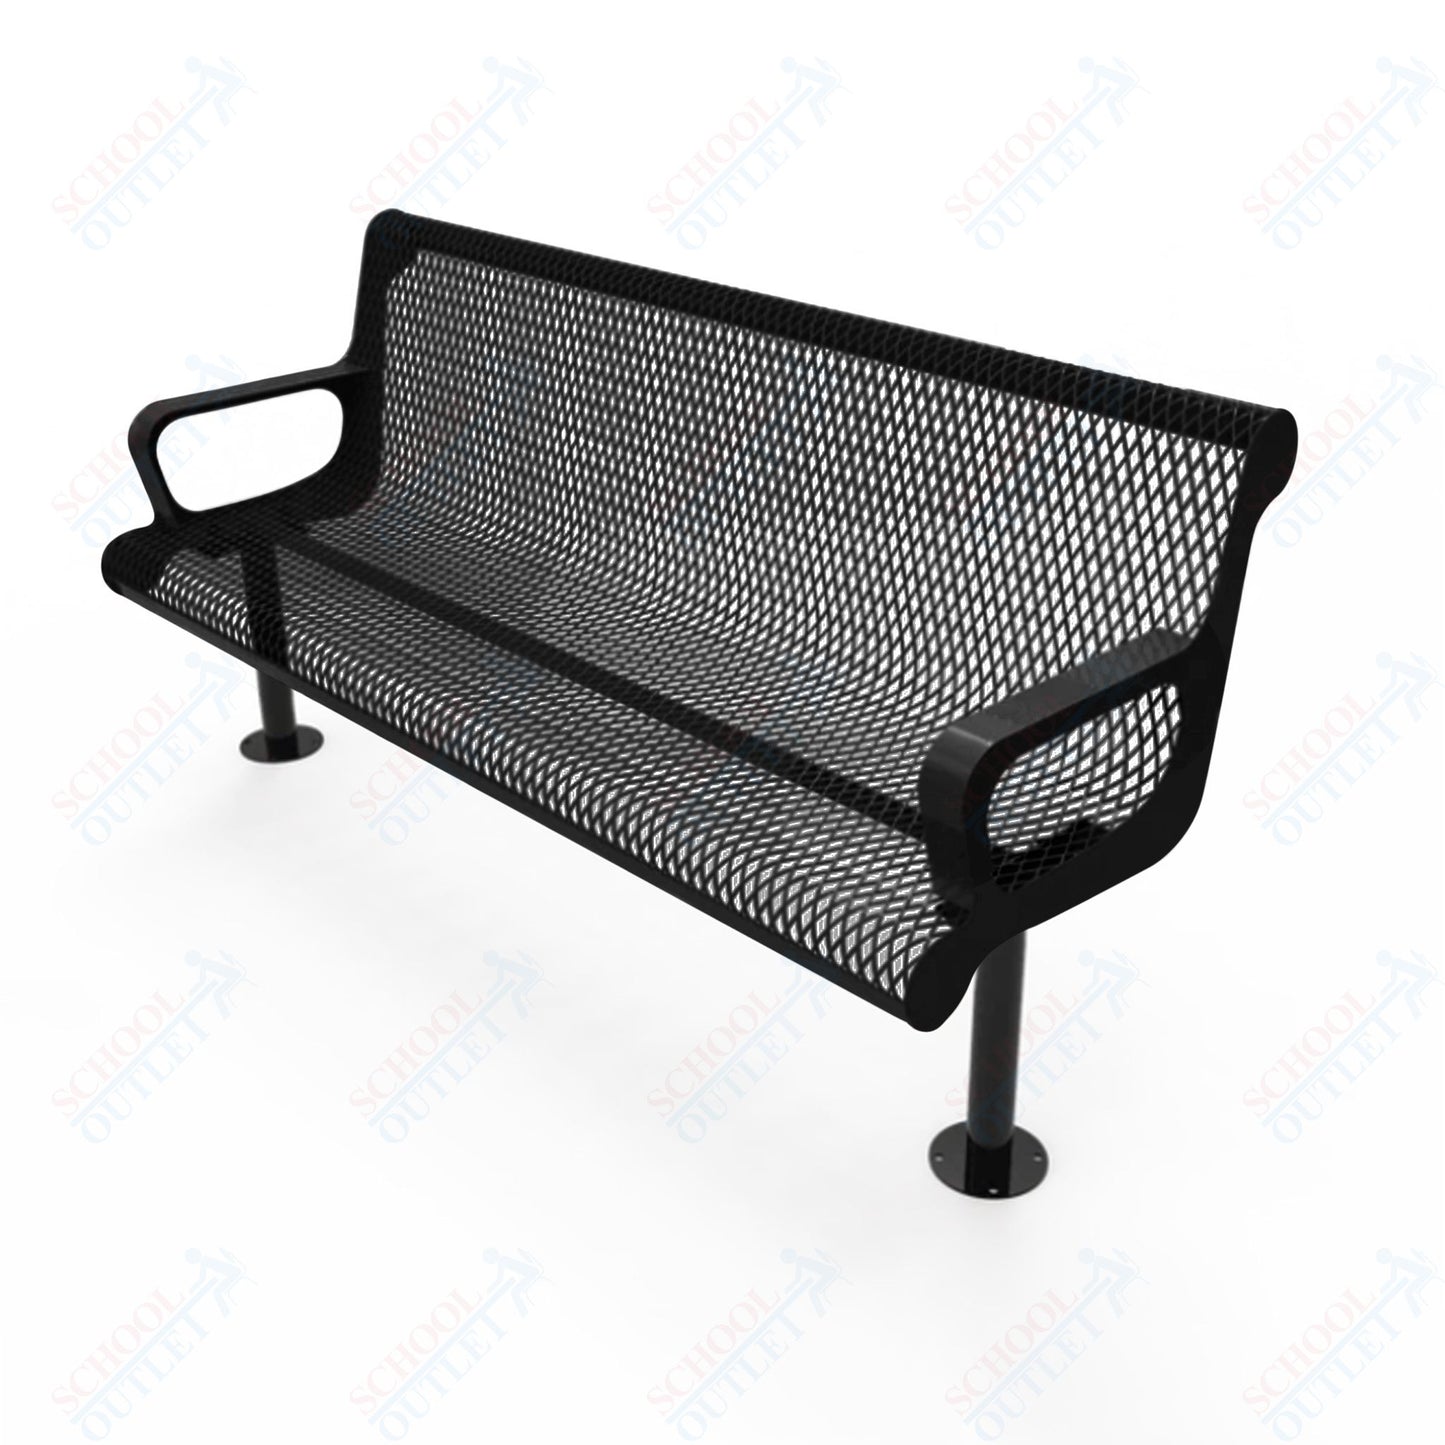 MyTcoat - Contoured Outdoor Bench with Arm - Surface Mount 4' L (MYT-BCA04-44)